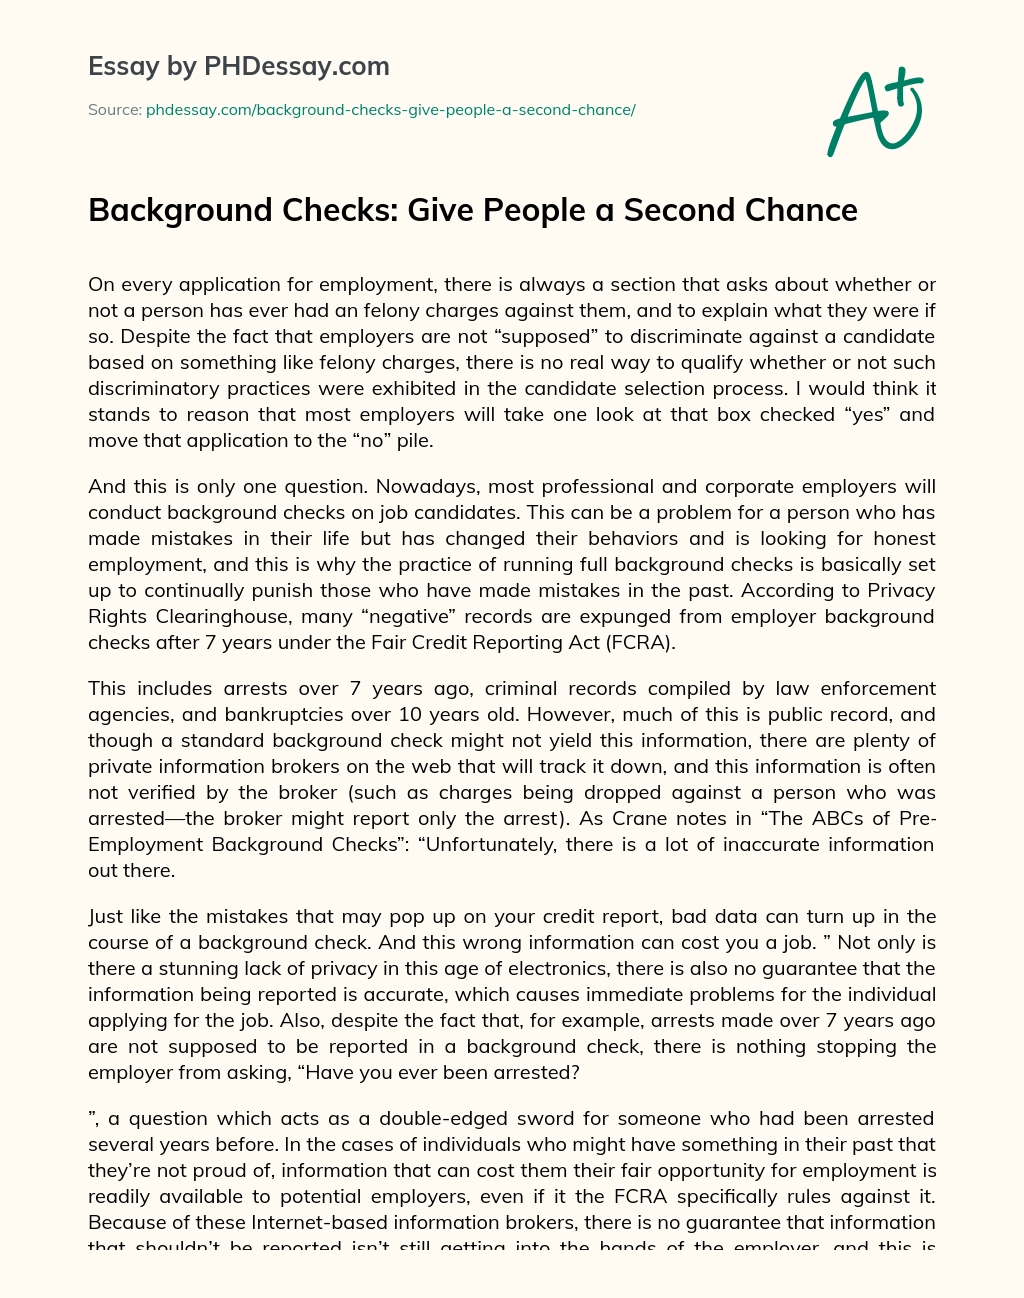 Background Checks: Give People a Second Chance essay